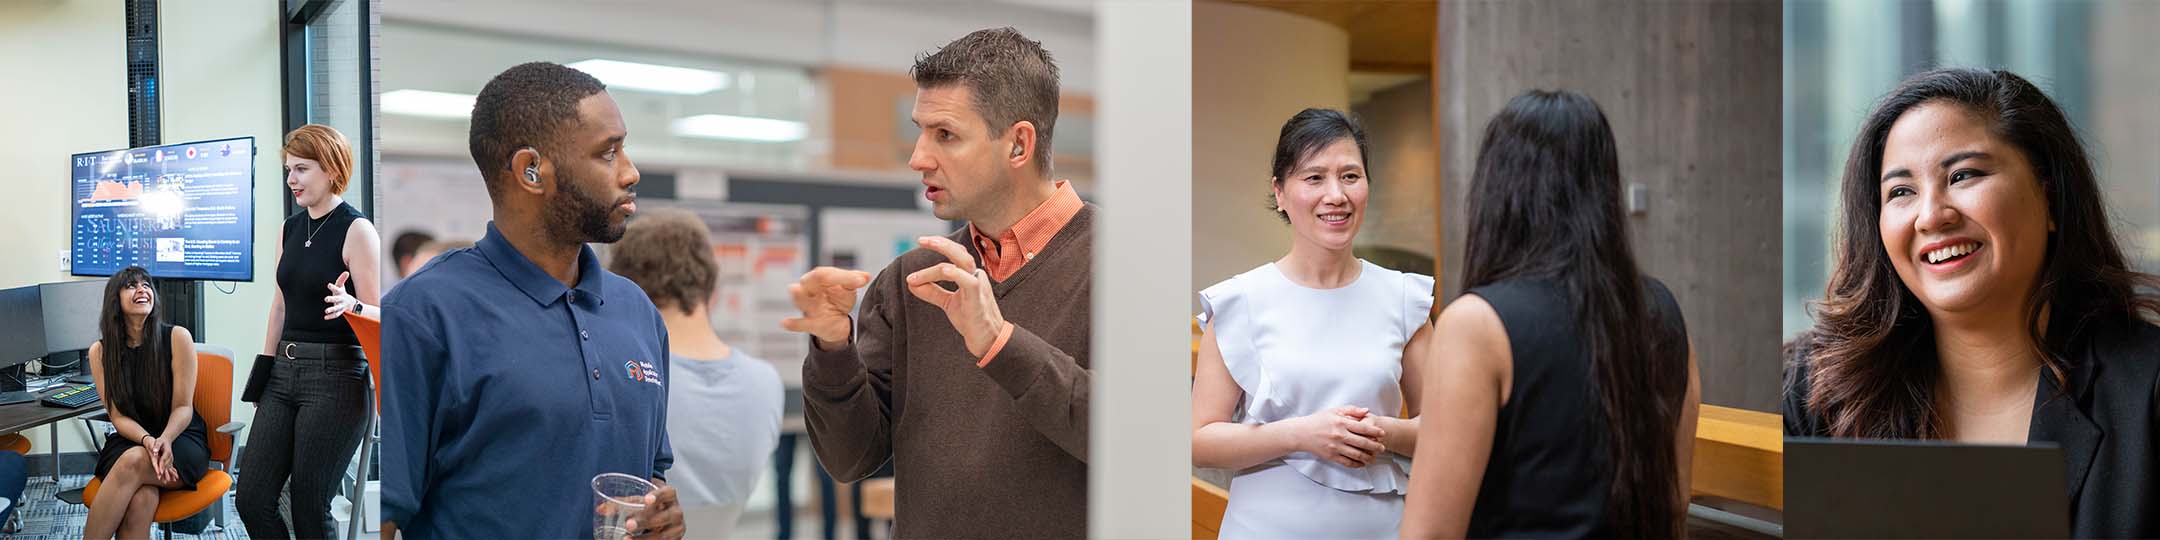 multiple images of staff and faculty in candid conversations